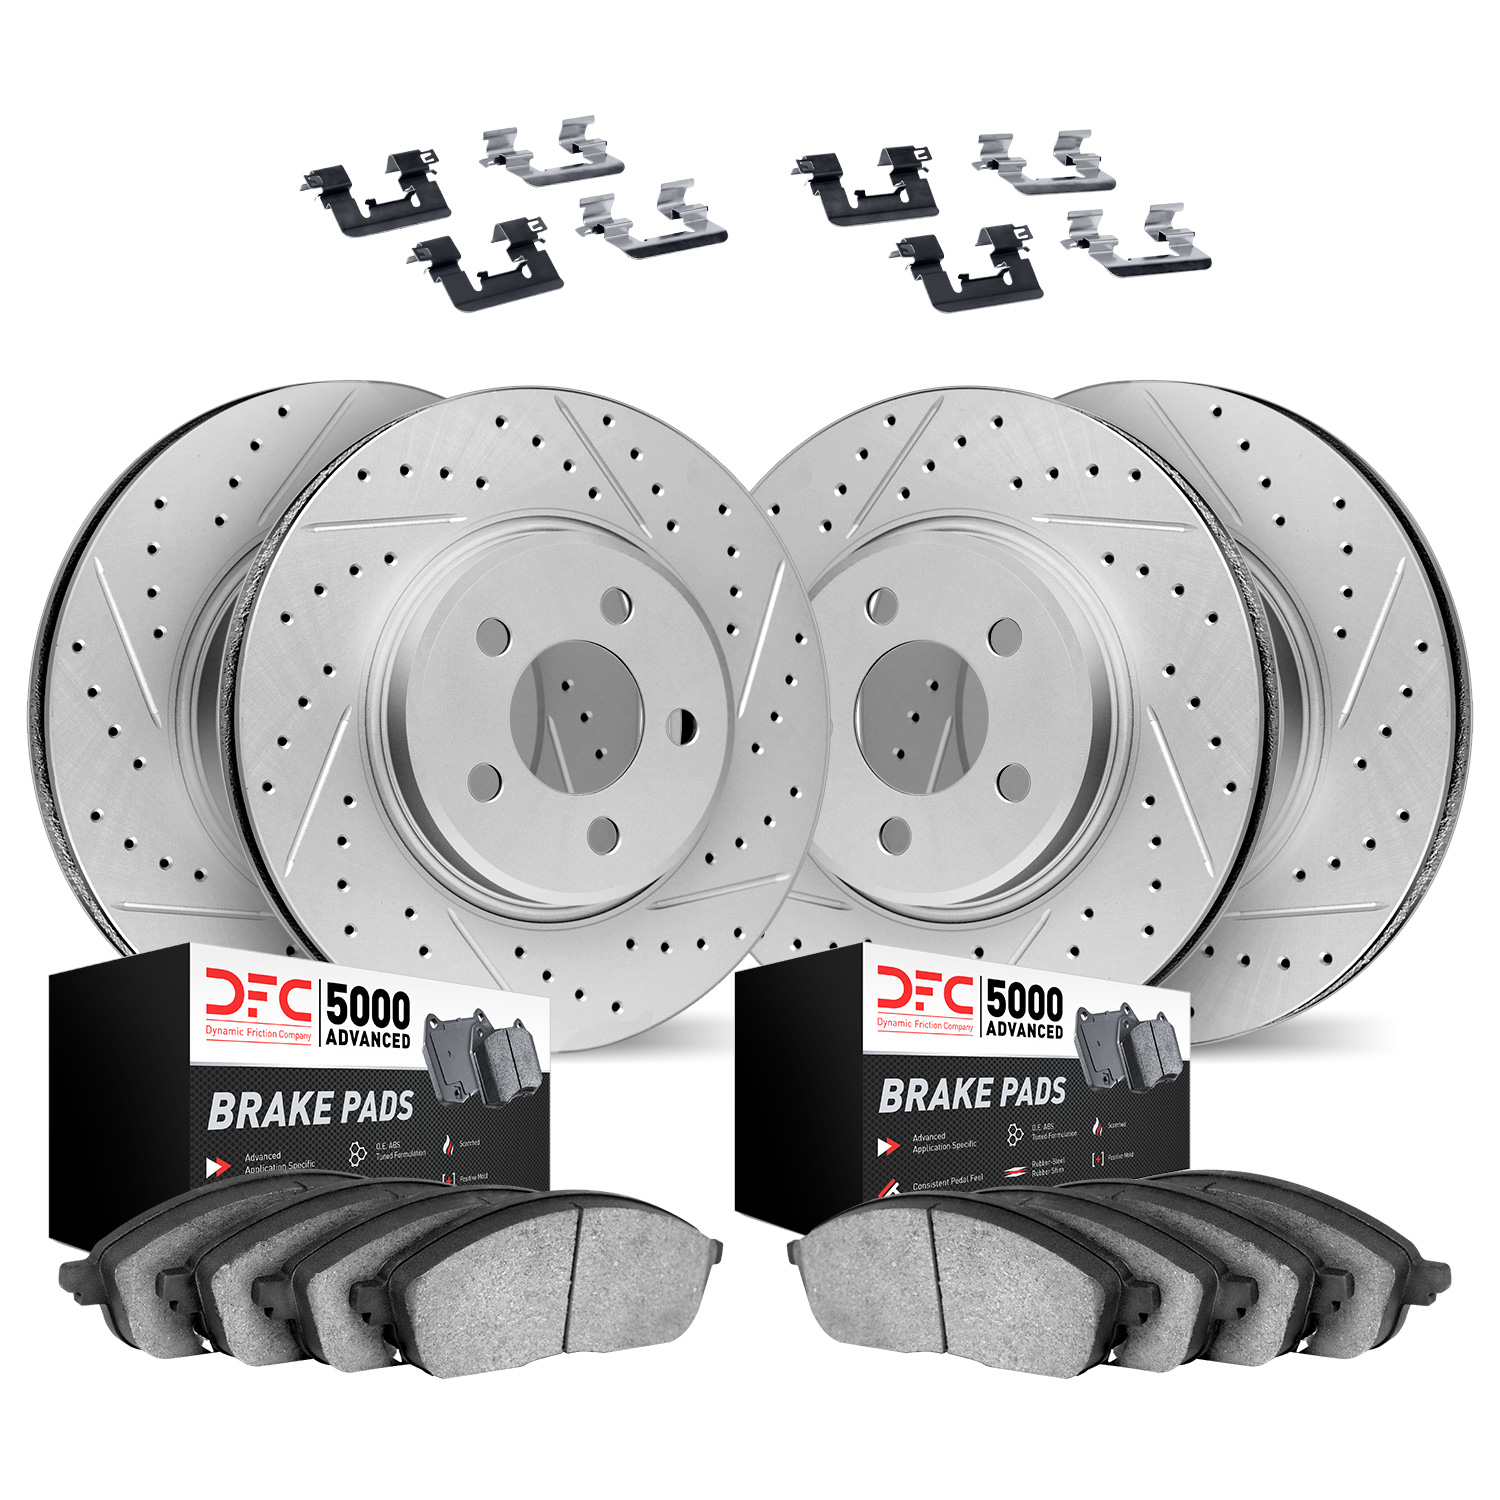 2514-31002 Geoperformance Drilled/Slotted Rotors w/5000 Advanced Brake Pads Kit & Hardware, 2001-2005 BMW, Position: Front and R